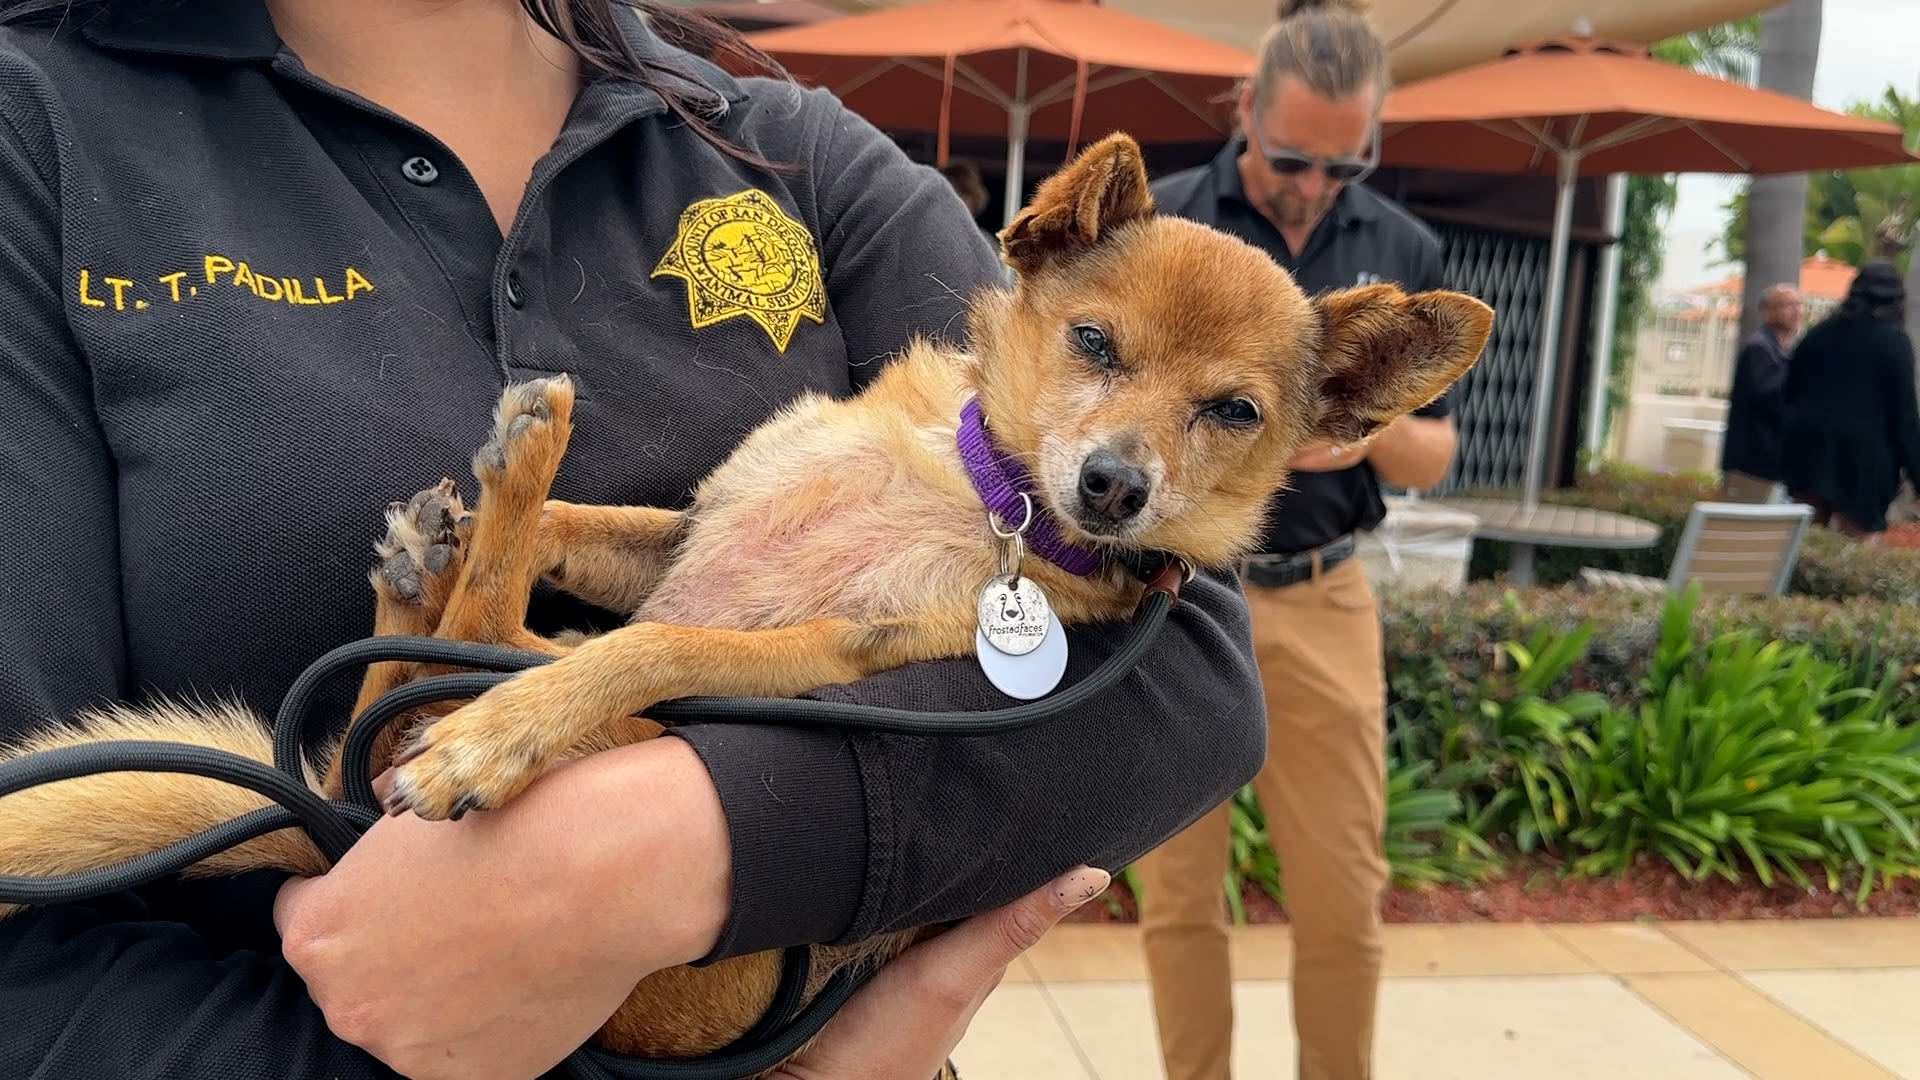 San Diego County's animal welfare groups put out urgent call for assistance